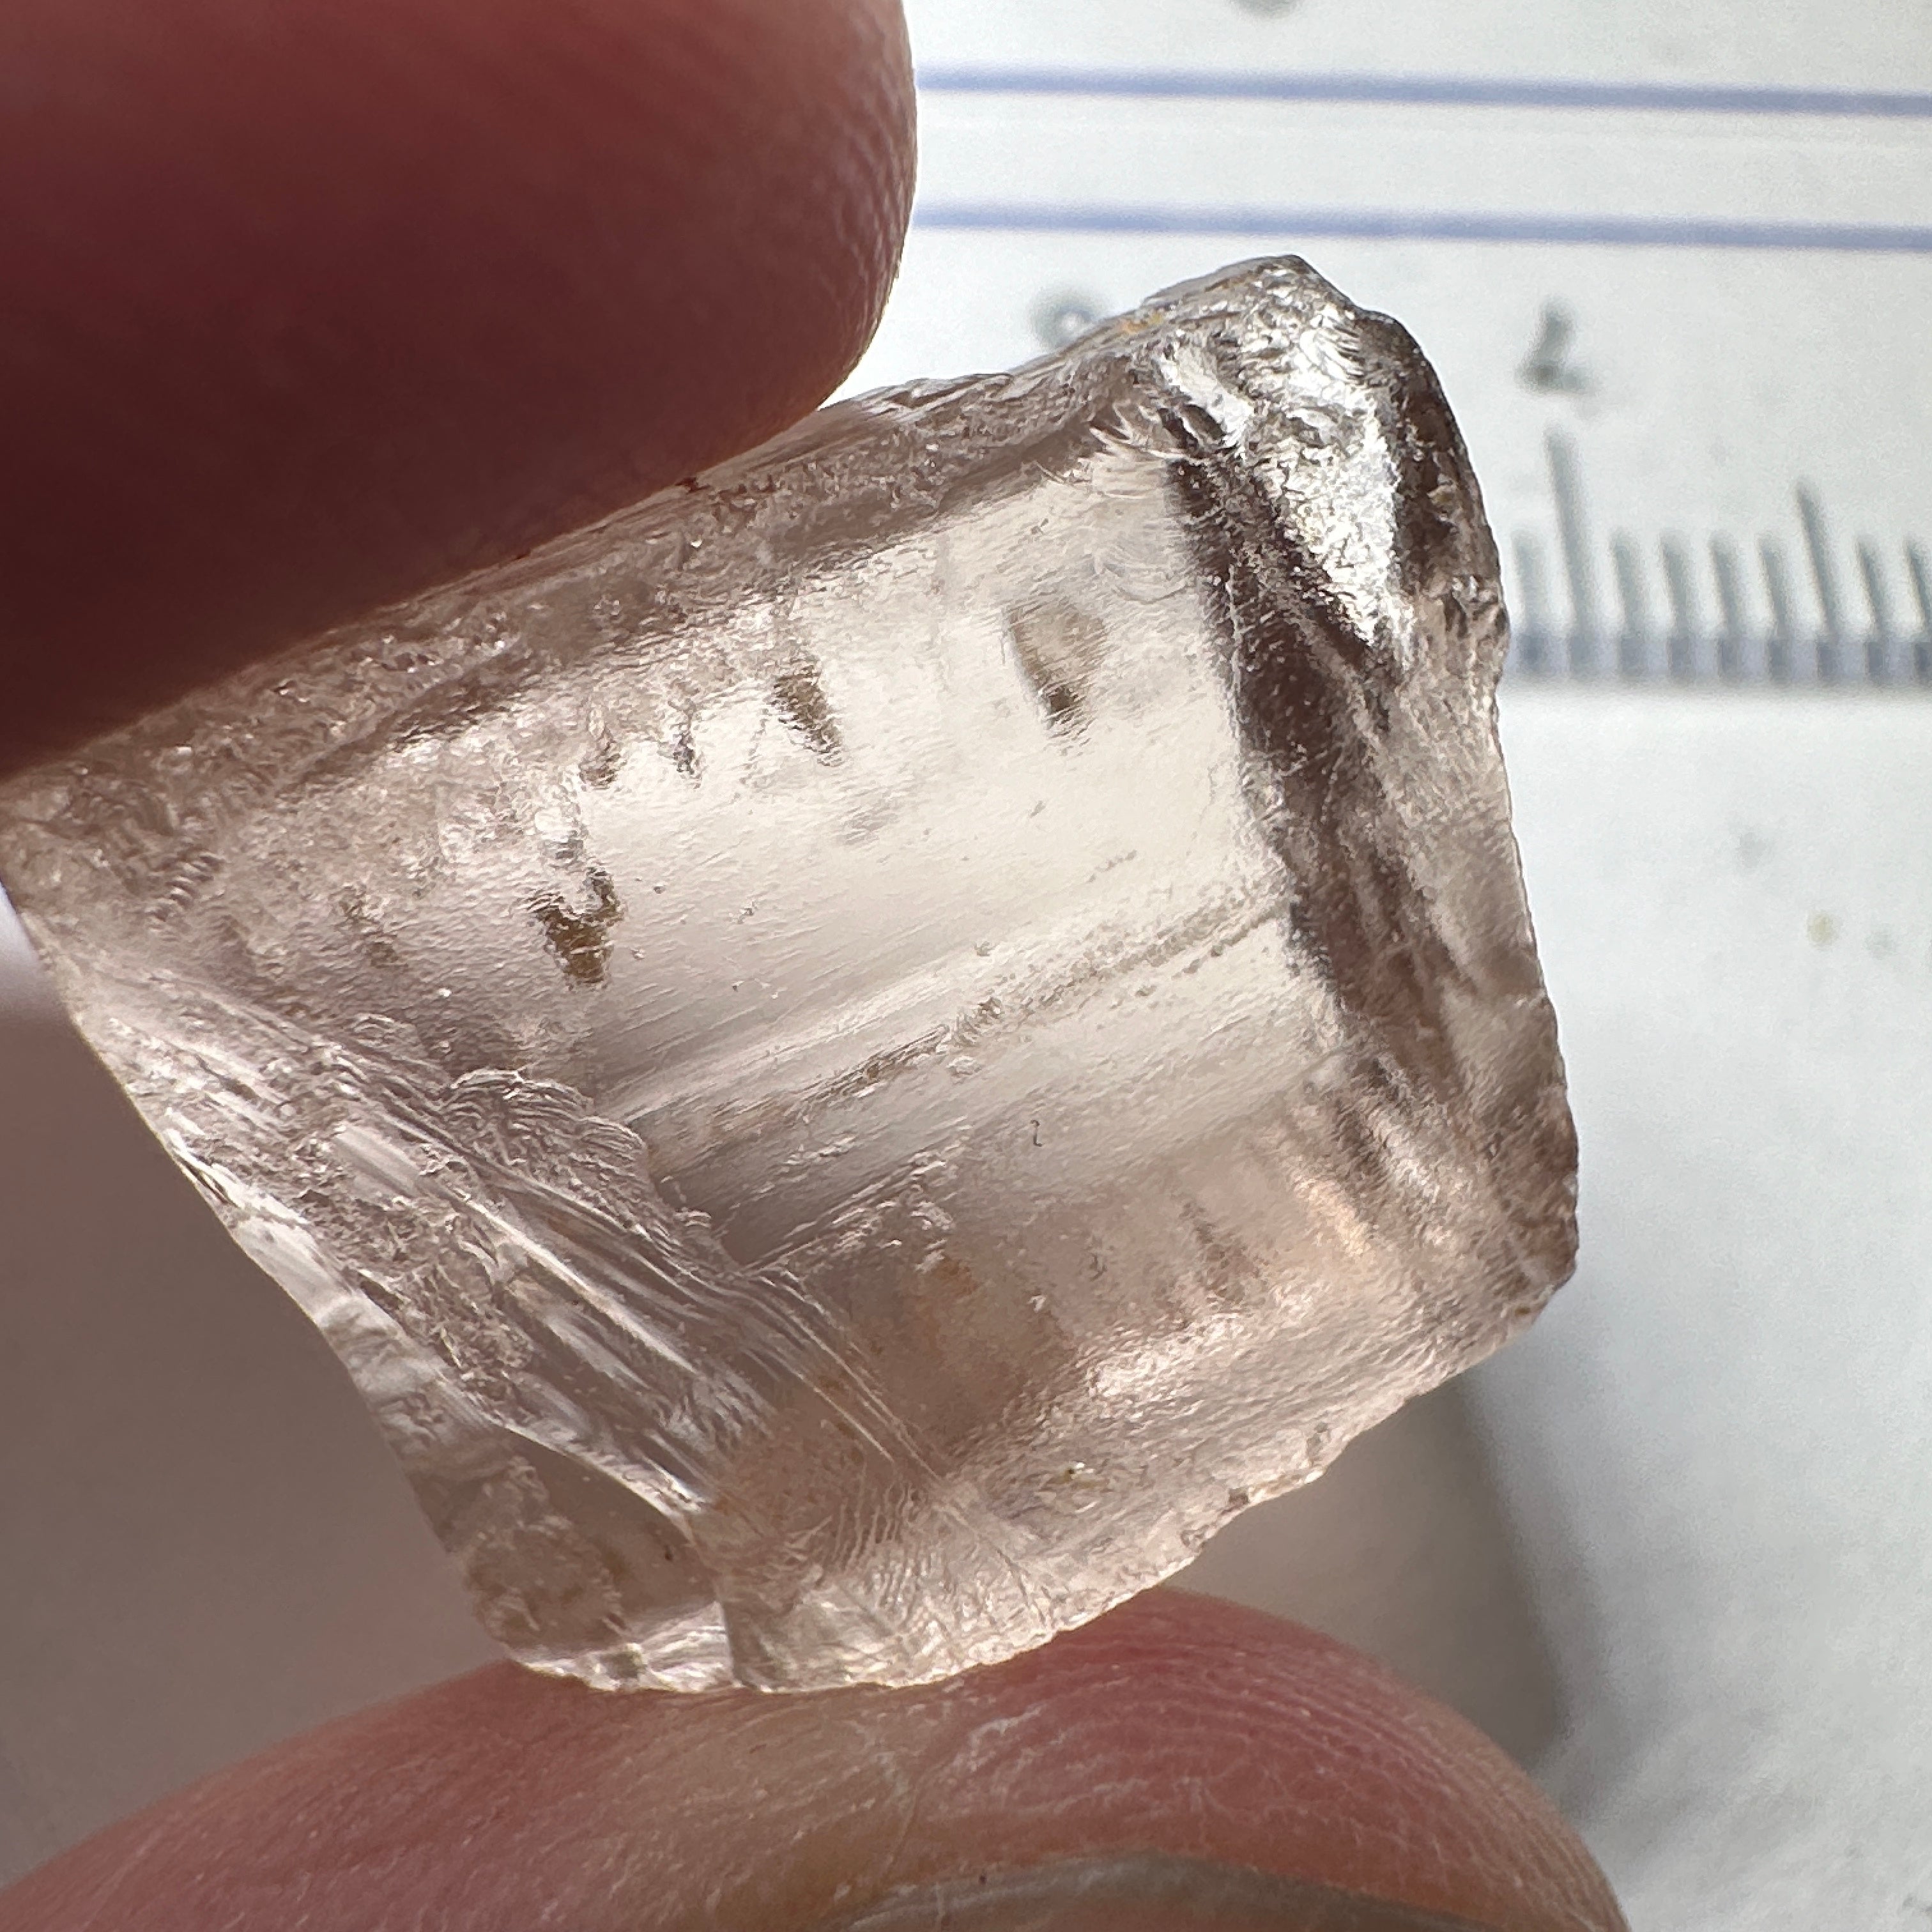 21.31ct Very Rare, Peach Pink Scapolite, Tanzania, Untreated Unheated, VVS-IF (flawless)